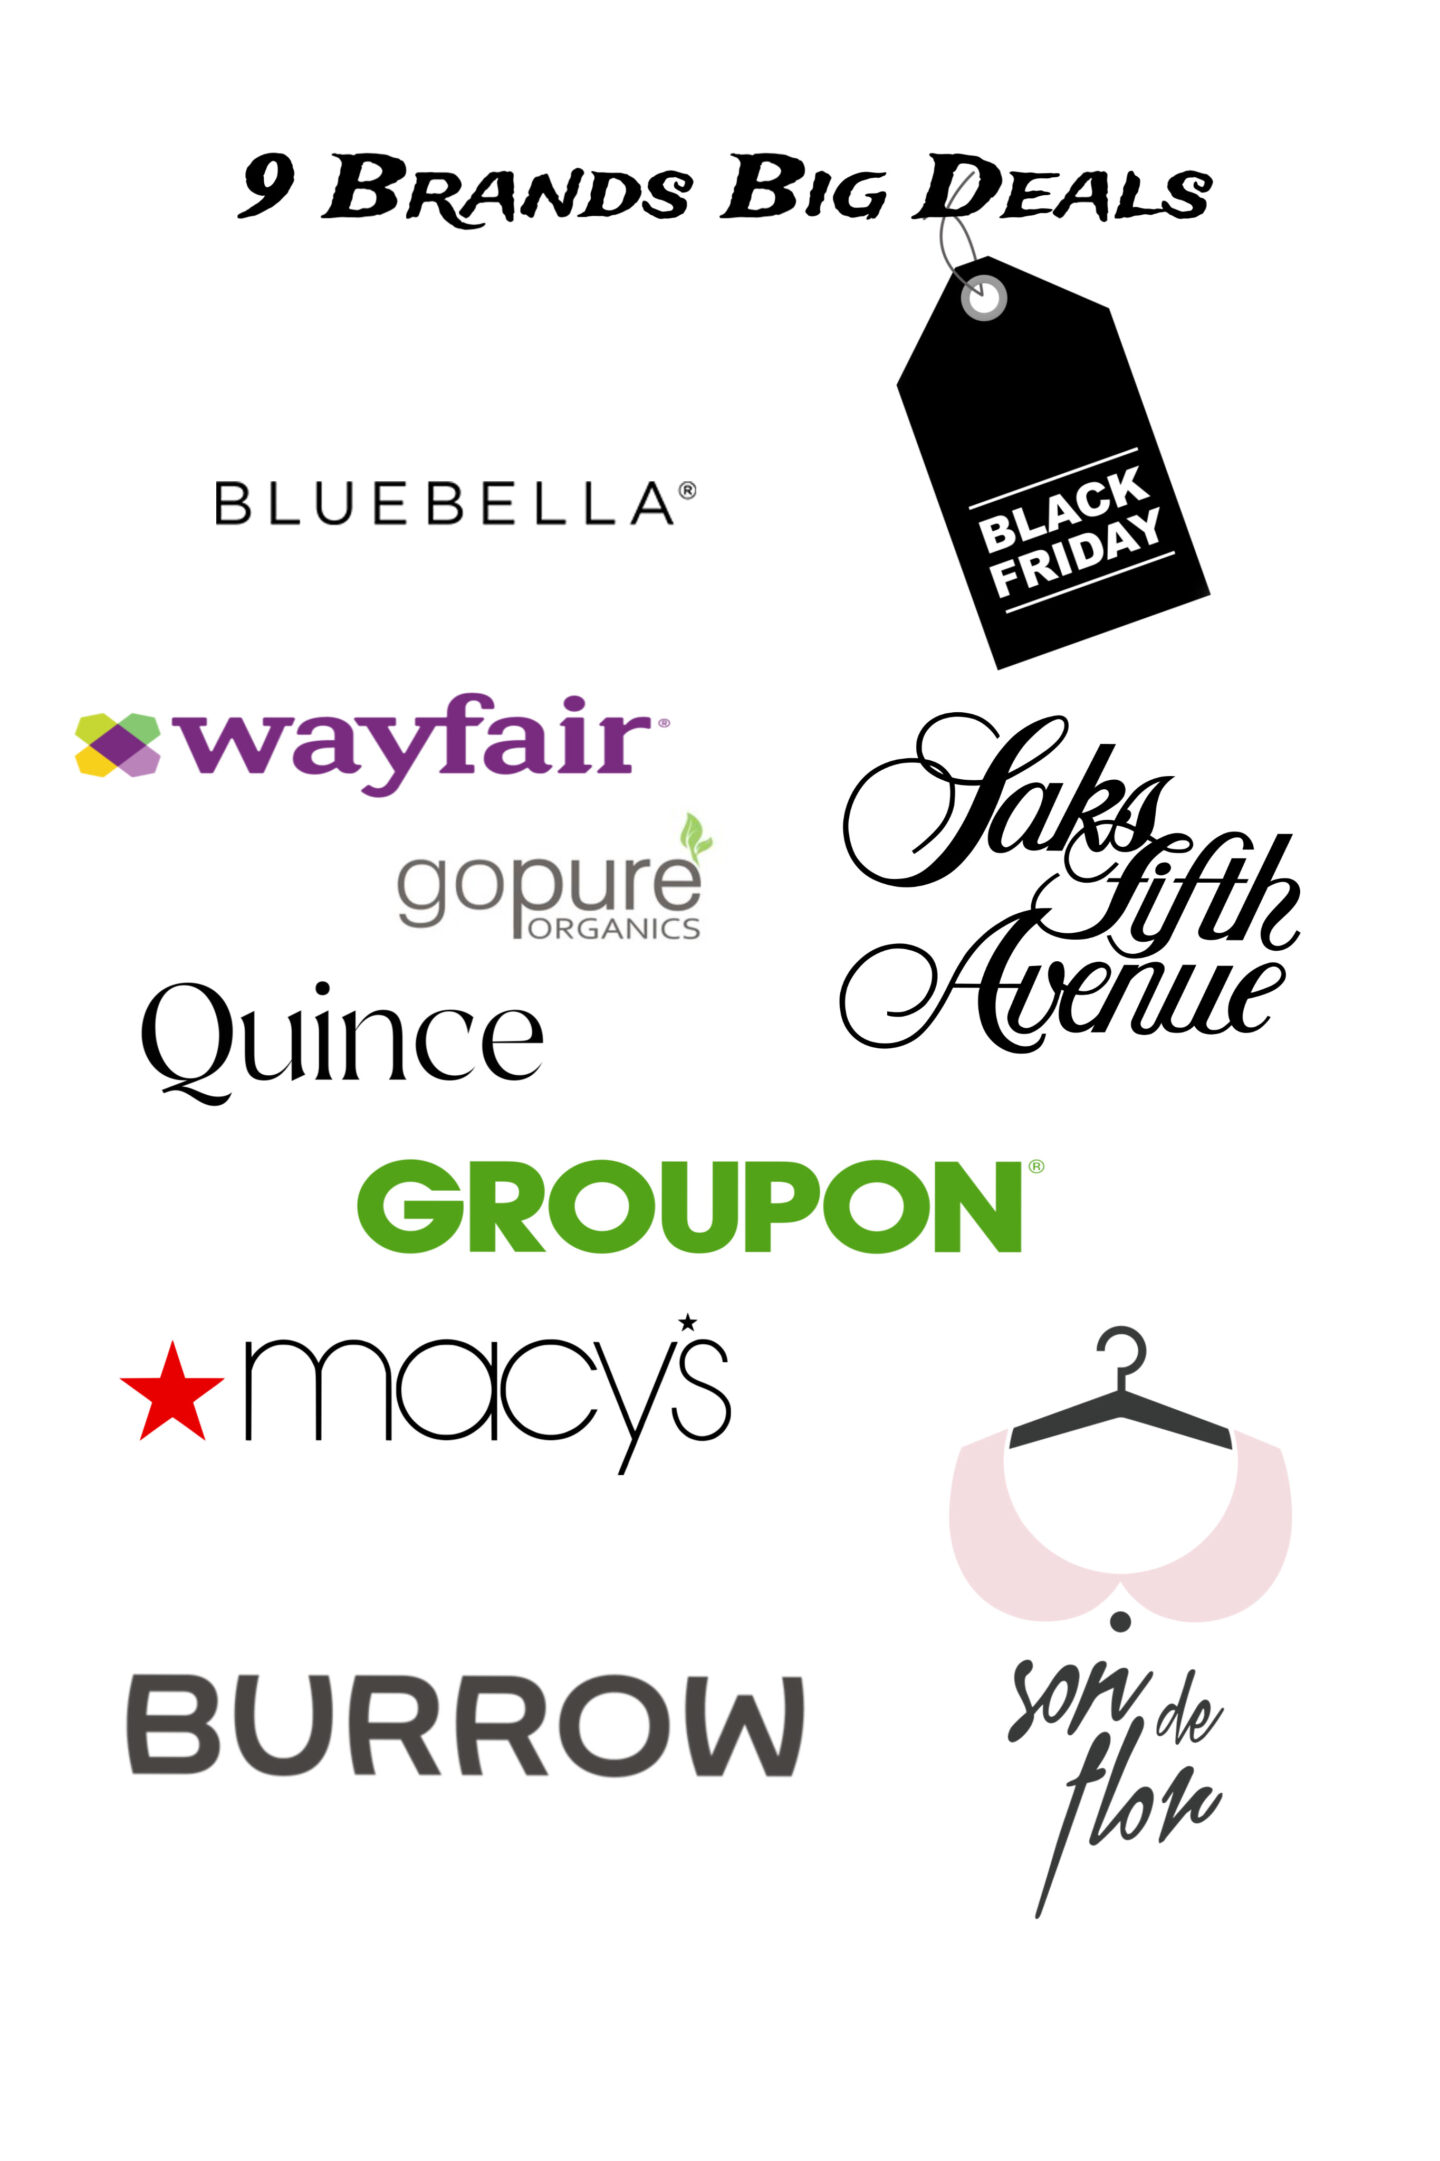 9 Brands Suggestions for Black Friday Shopping